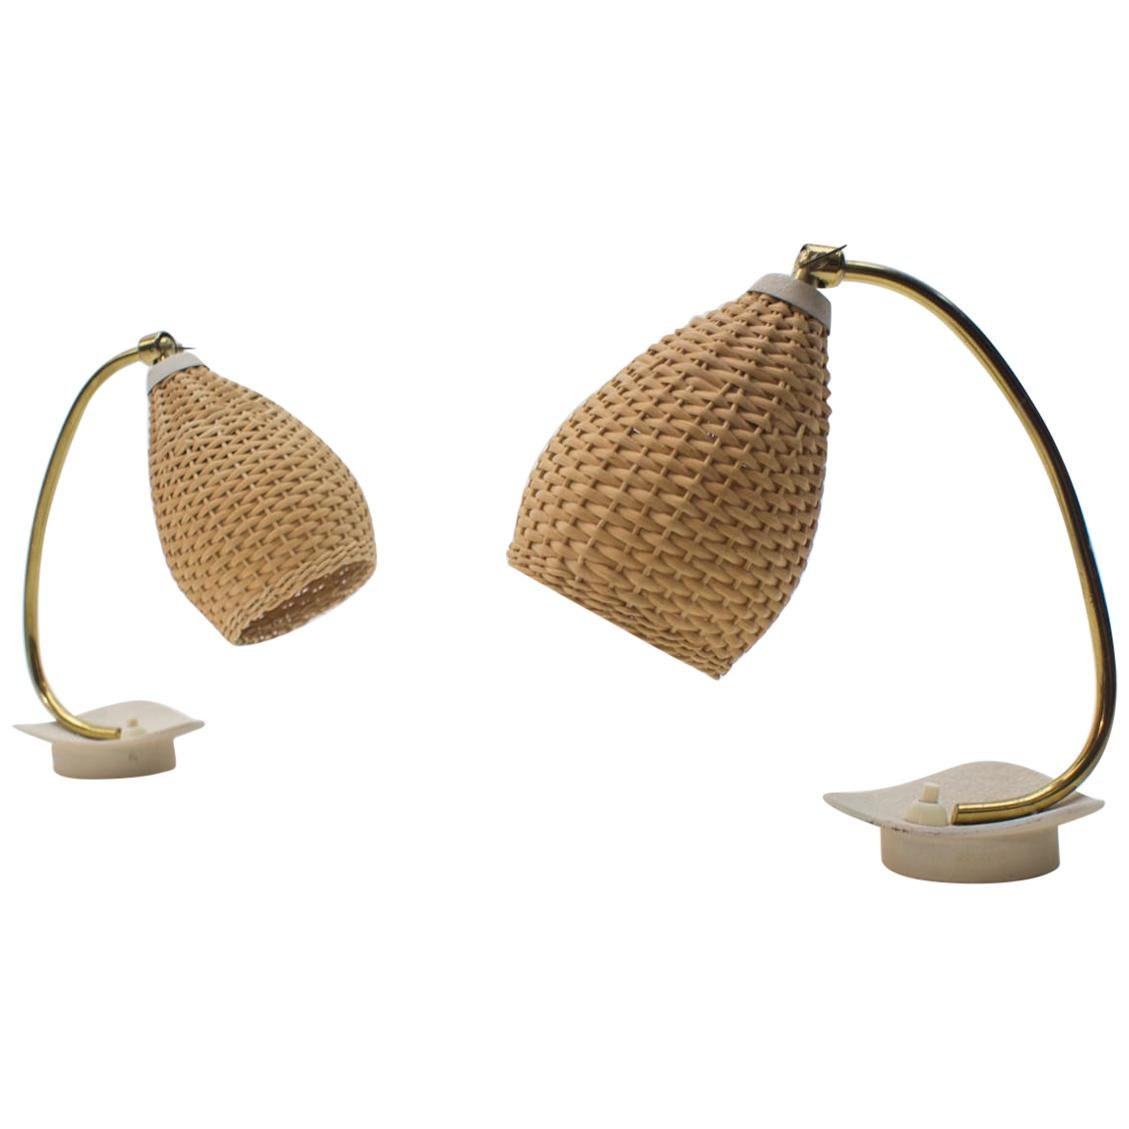 Pair of Lovely Brass and Wicker Table Lamps from the 1950s, Austria For Sale